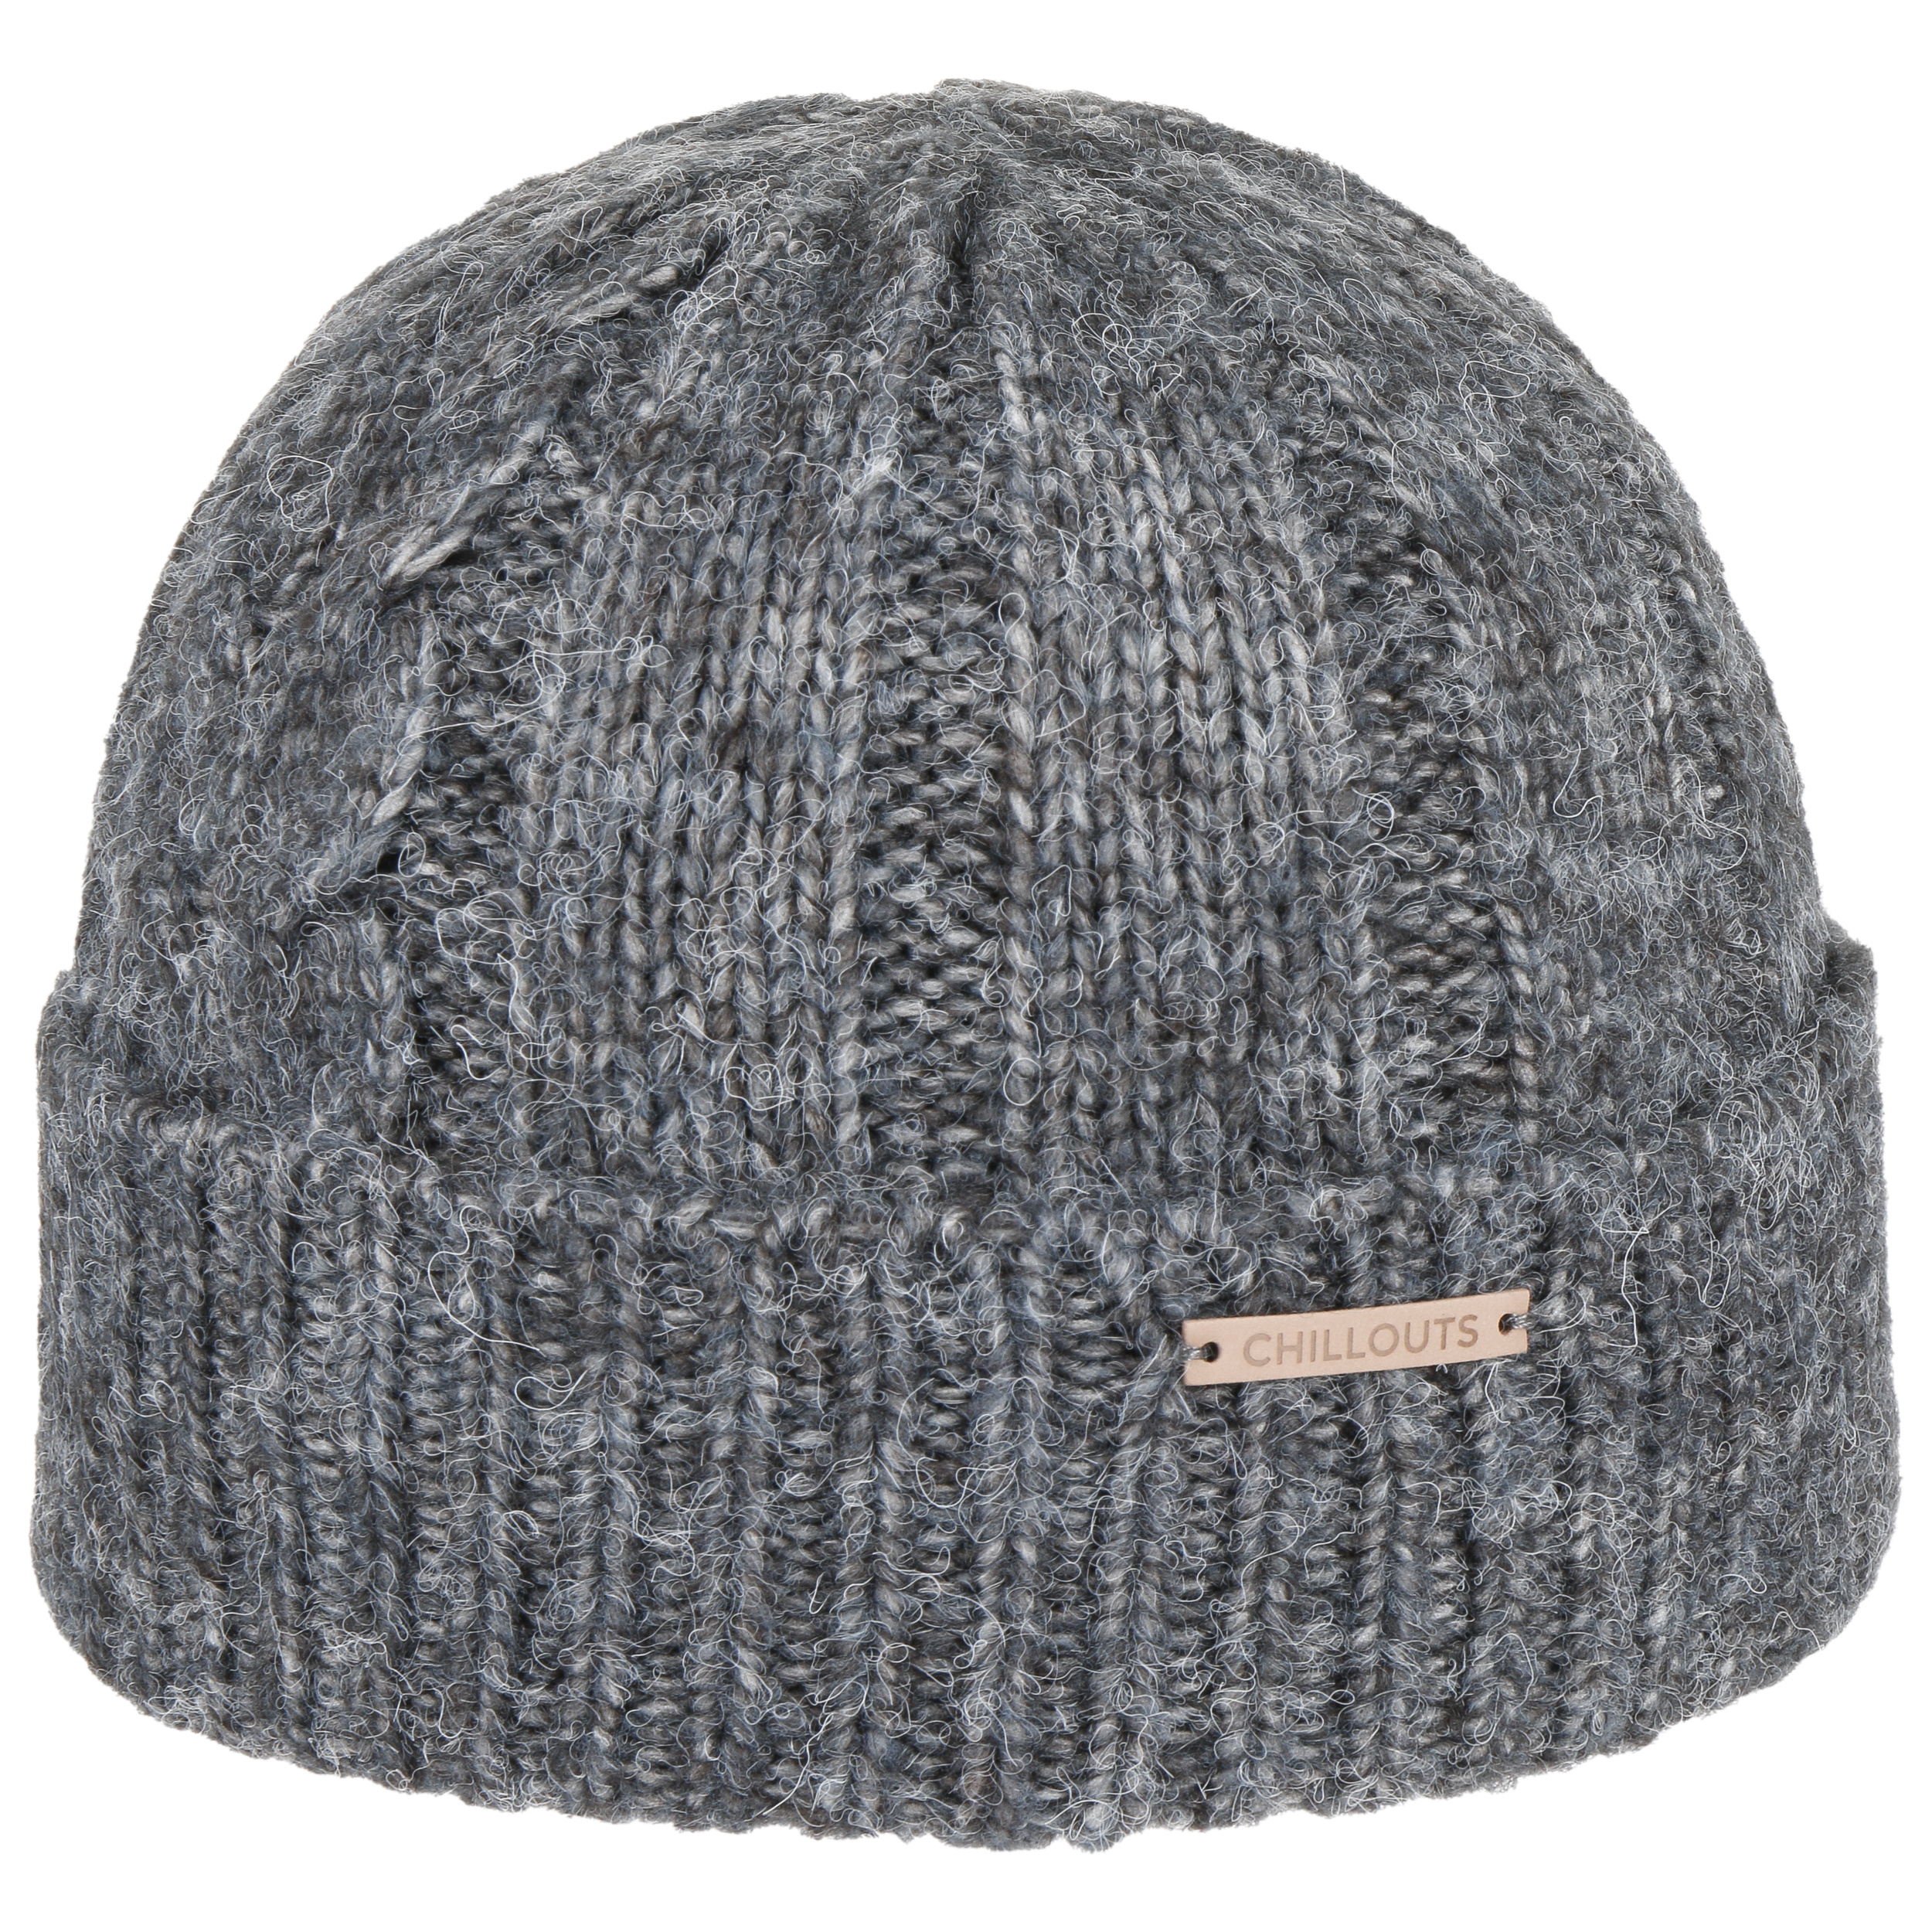 by 22,95 Varena € Hat Recycled Beanie - Chillouts